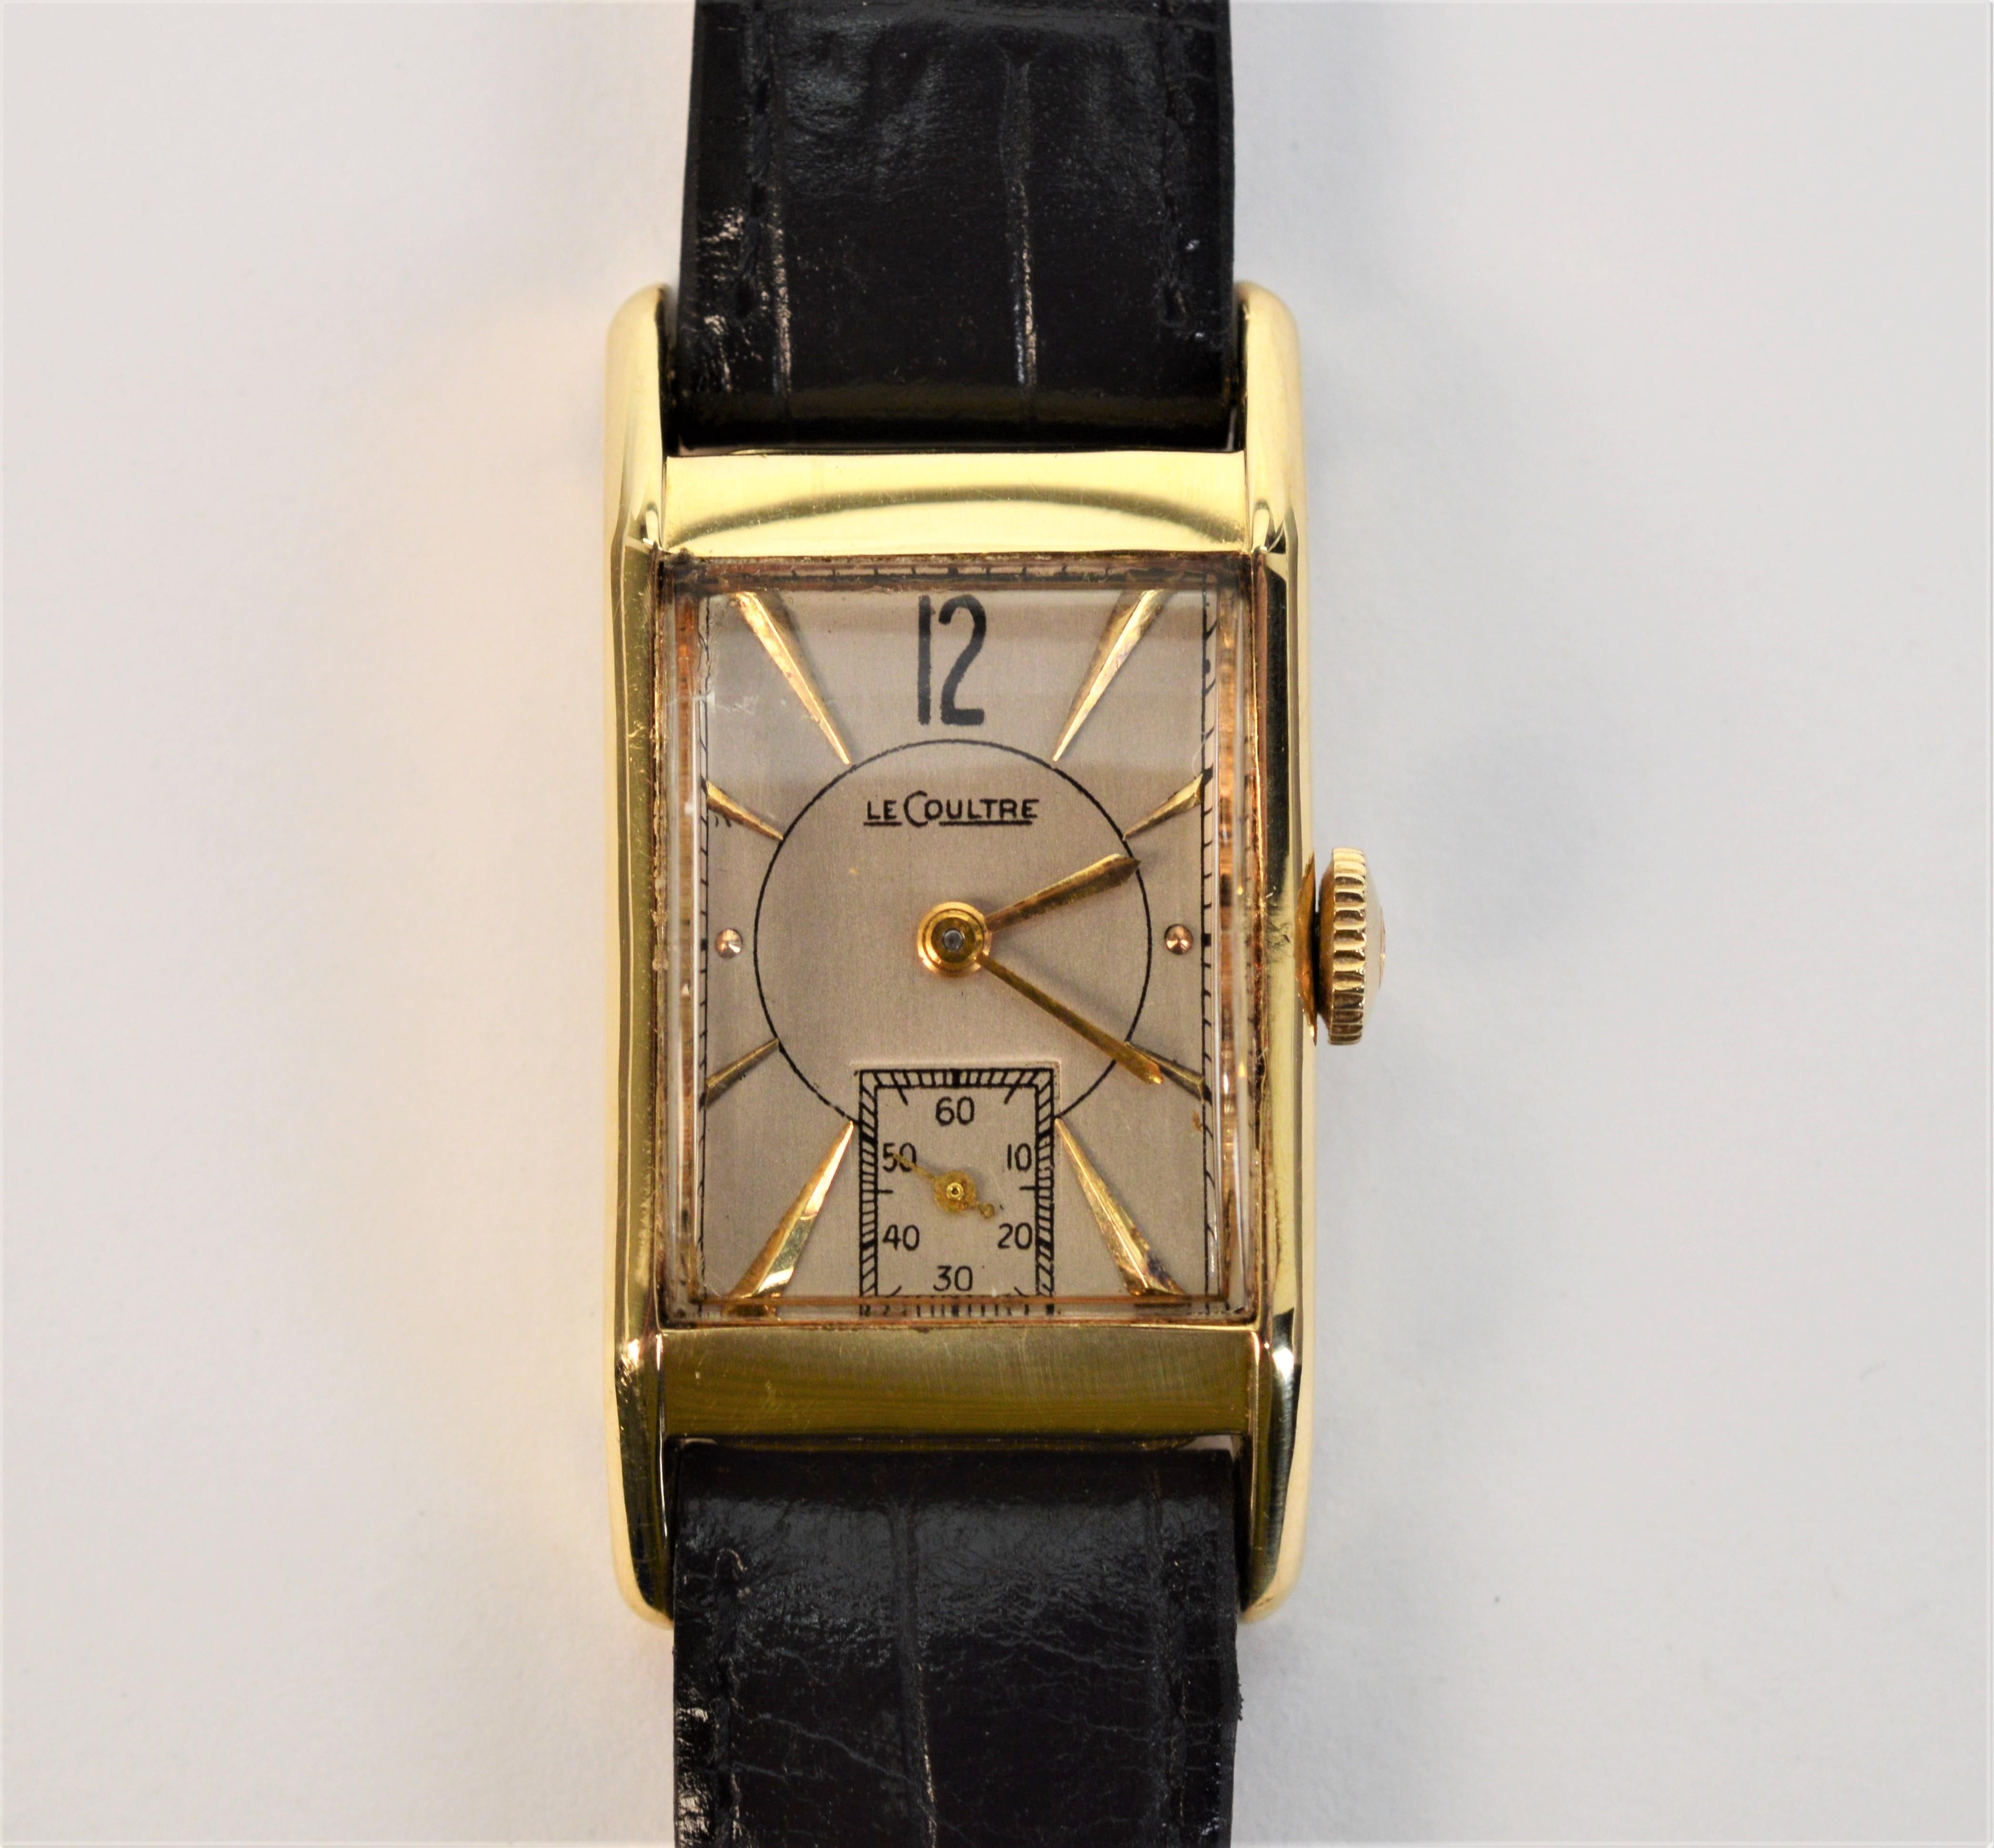 Appreciate the glorious lines of this Art Deco, LeCoultre Model 175 Wrist Watch. Sporting a 14 karat yellow gold rectangular 28 x 20mm case (number 28397), this circa 1940s wrist watch has unique vintage appeal.  On a silver-toned dial, arrow point